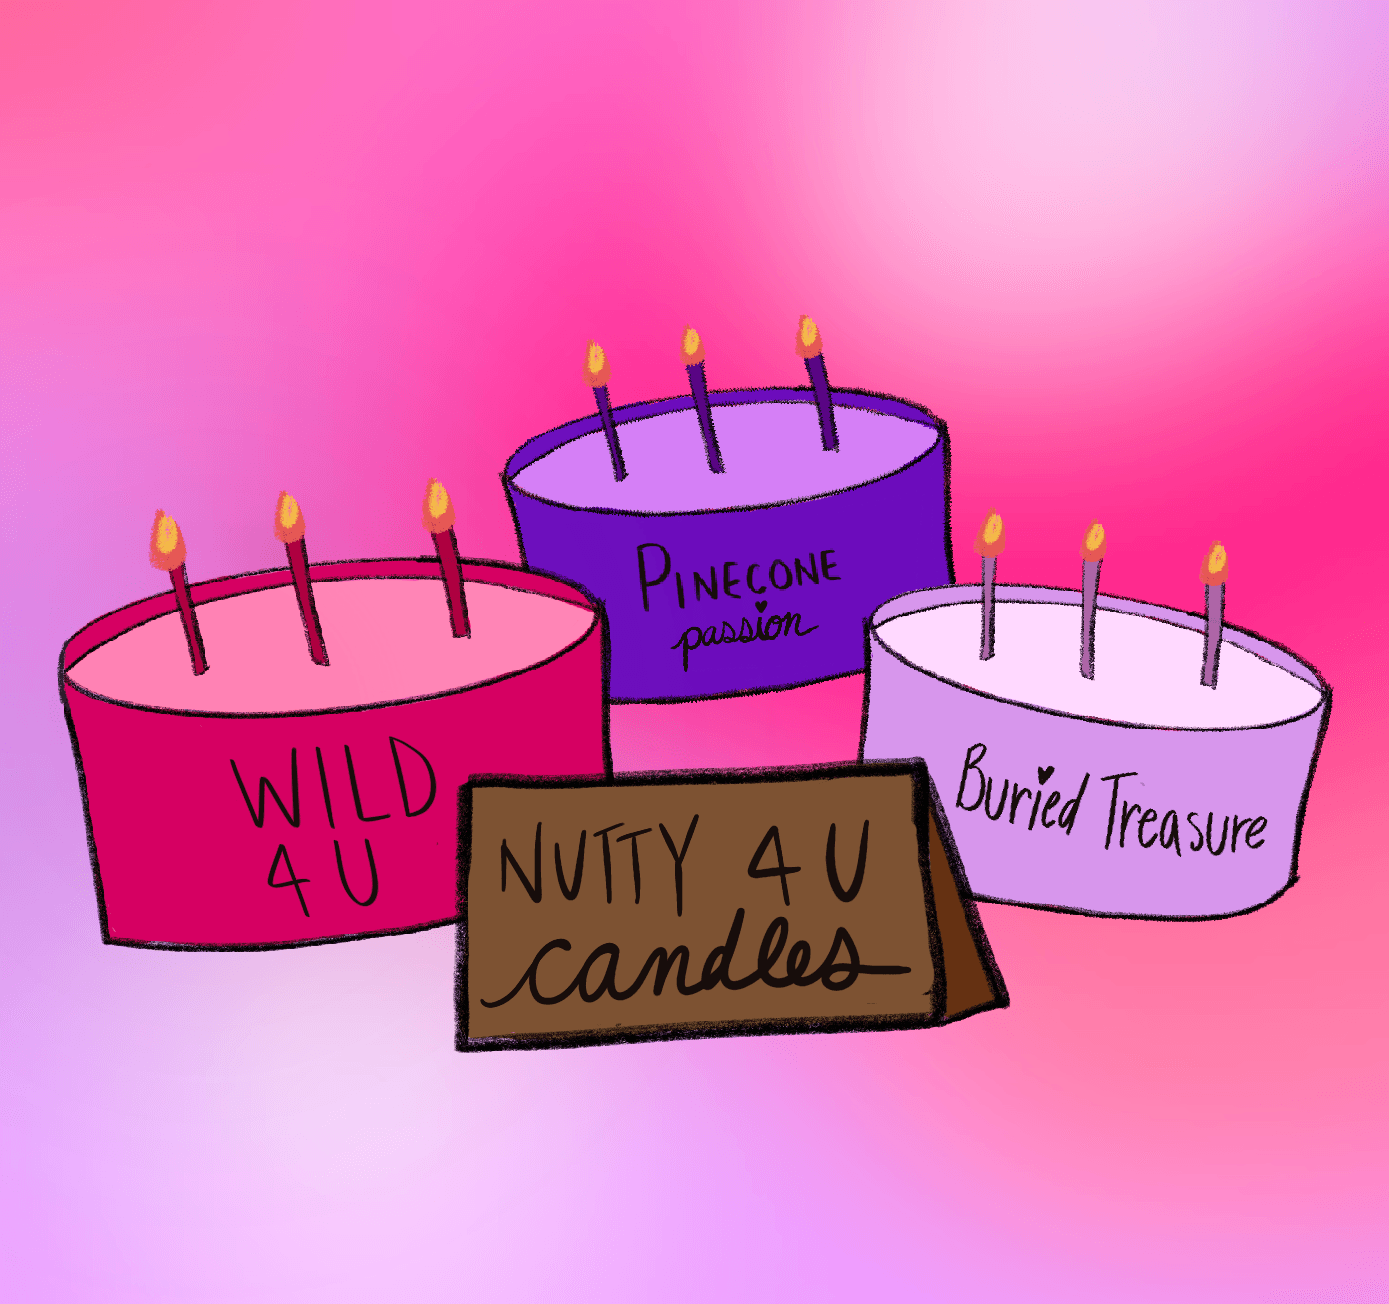 nutty 4 u candles - 3 pack #2